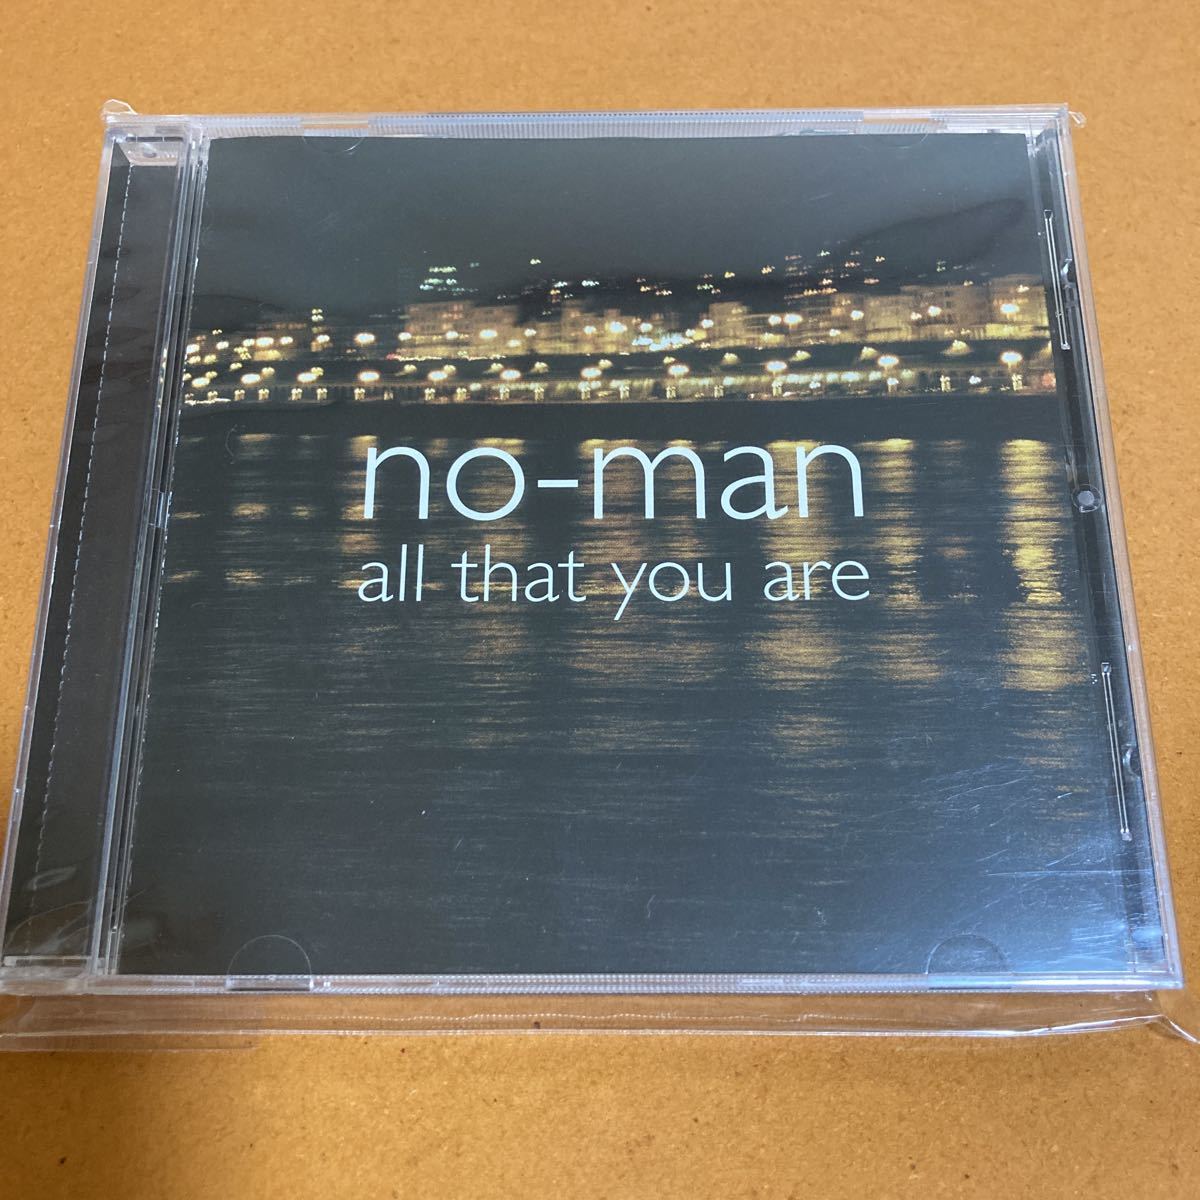 no-man／all that you are／Steven Wilson／Tim Bowness／輸入盤／美品／入手困難_画像1